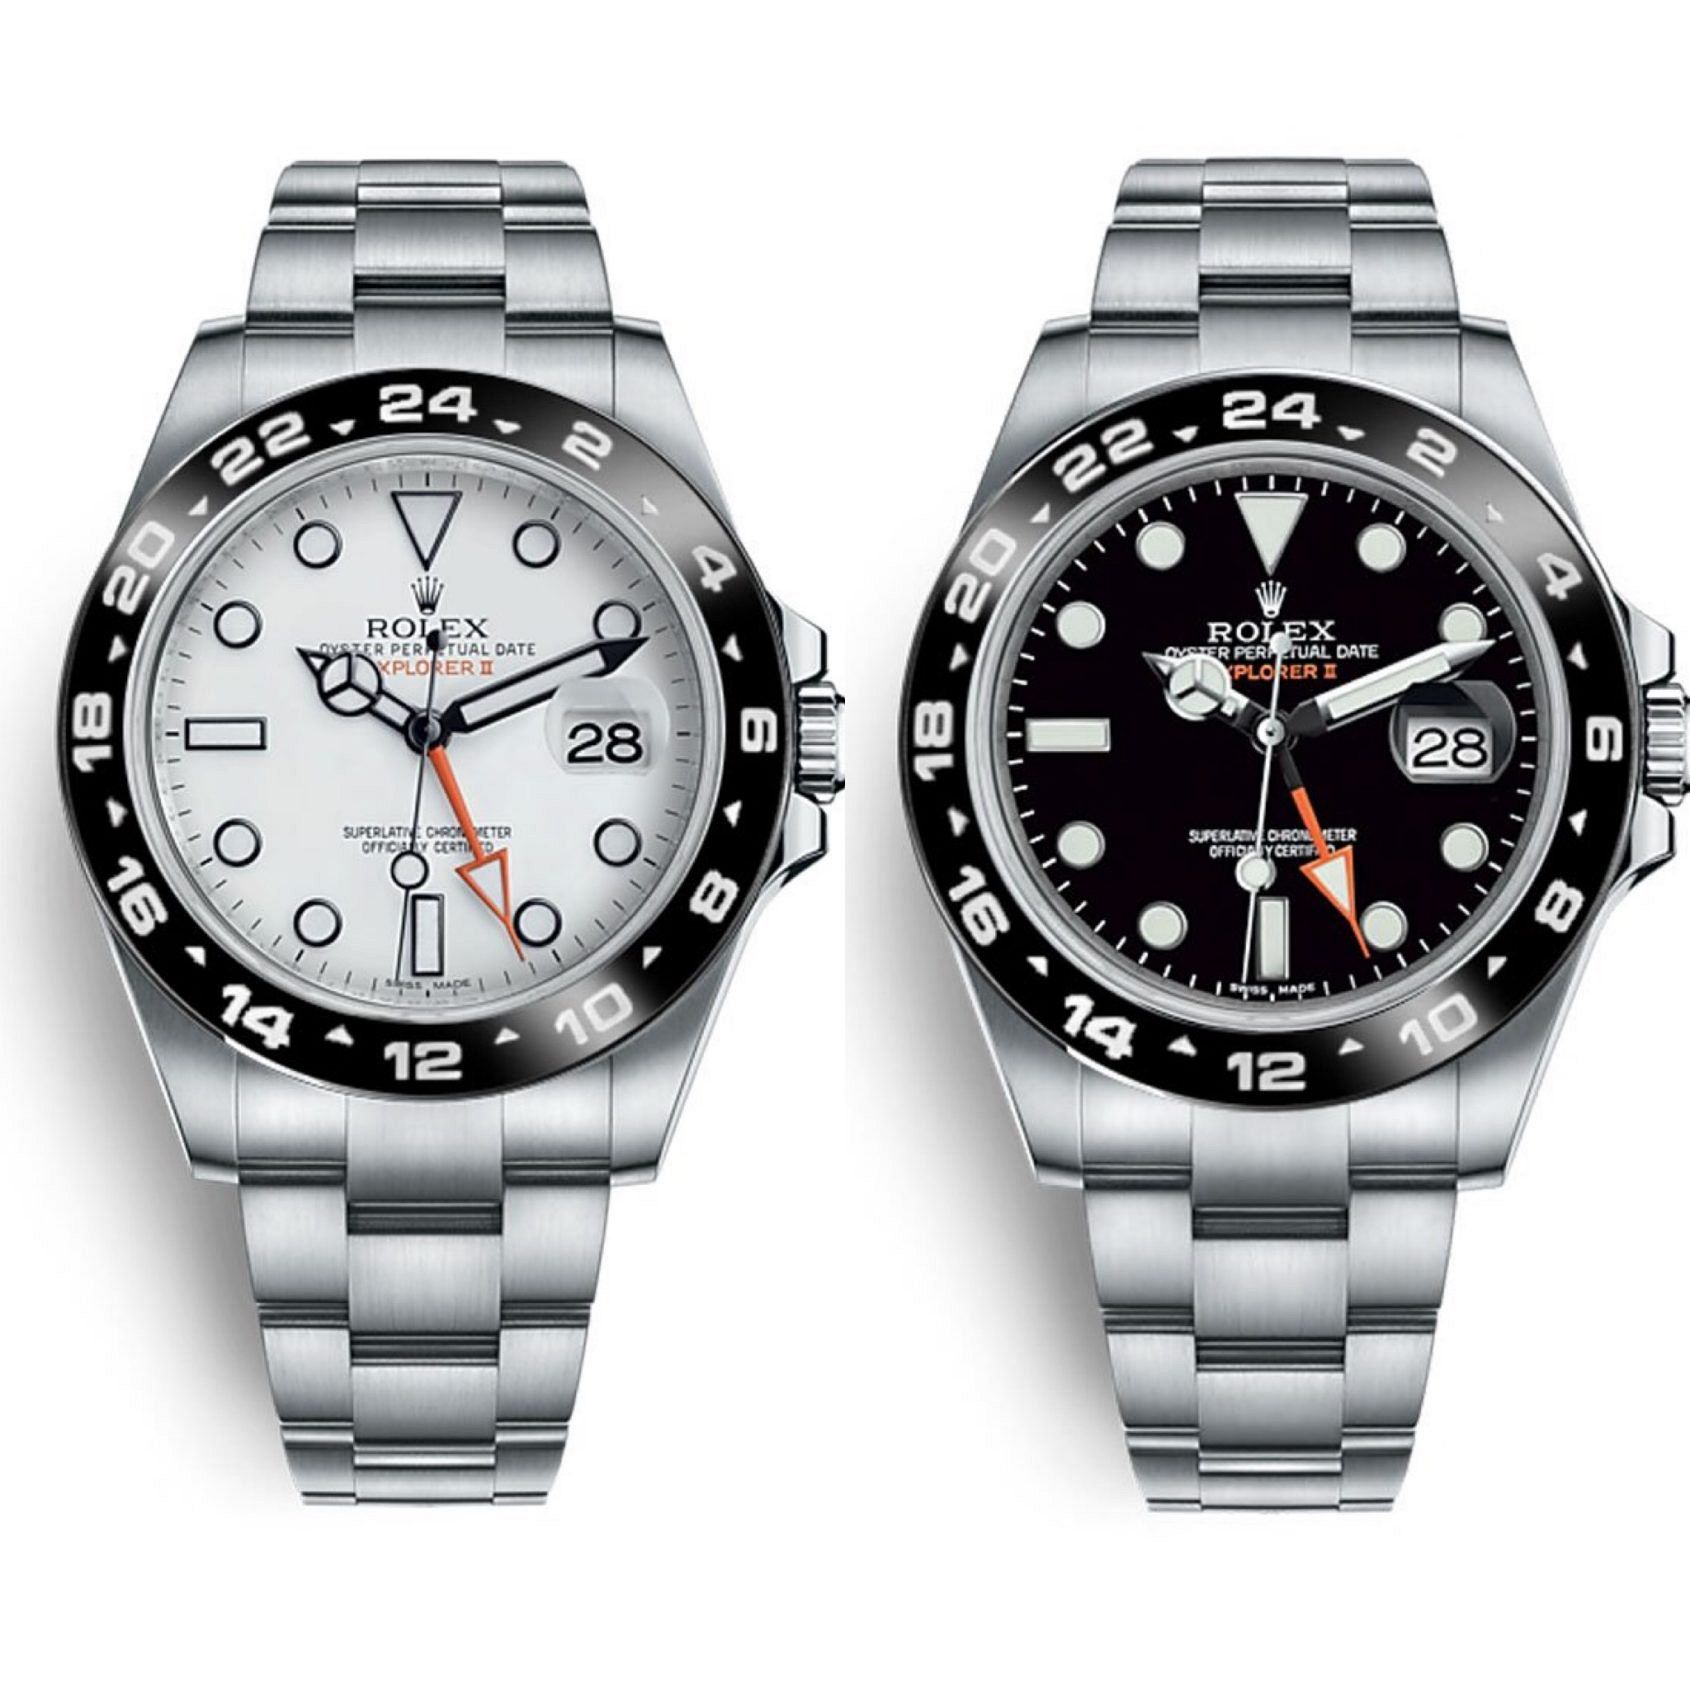 Regulering jug rør Predictions: Will we see new Rolex Explorer watches in 2021?